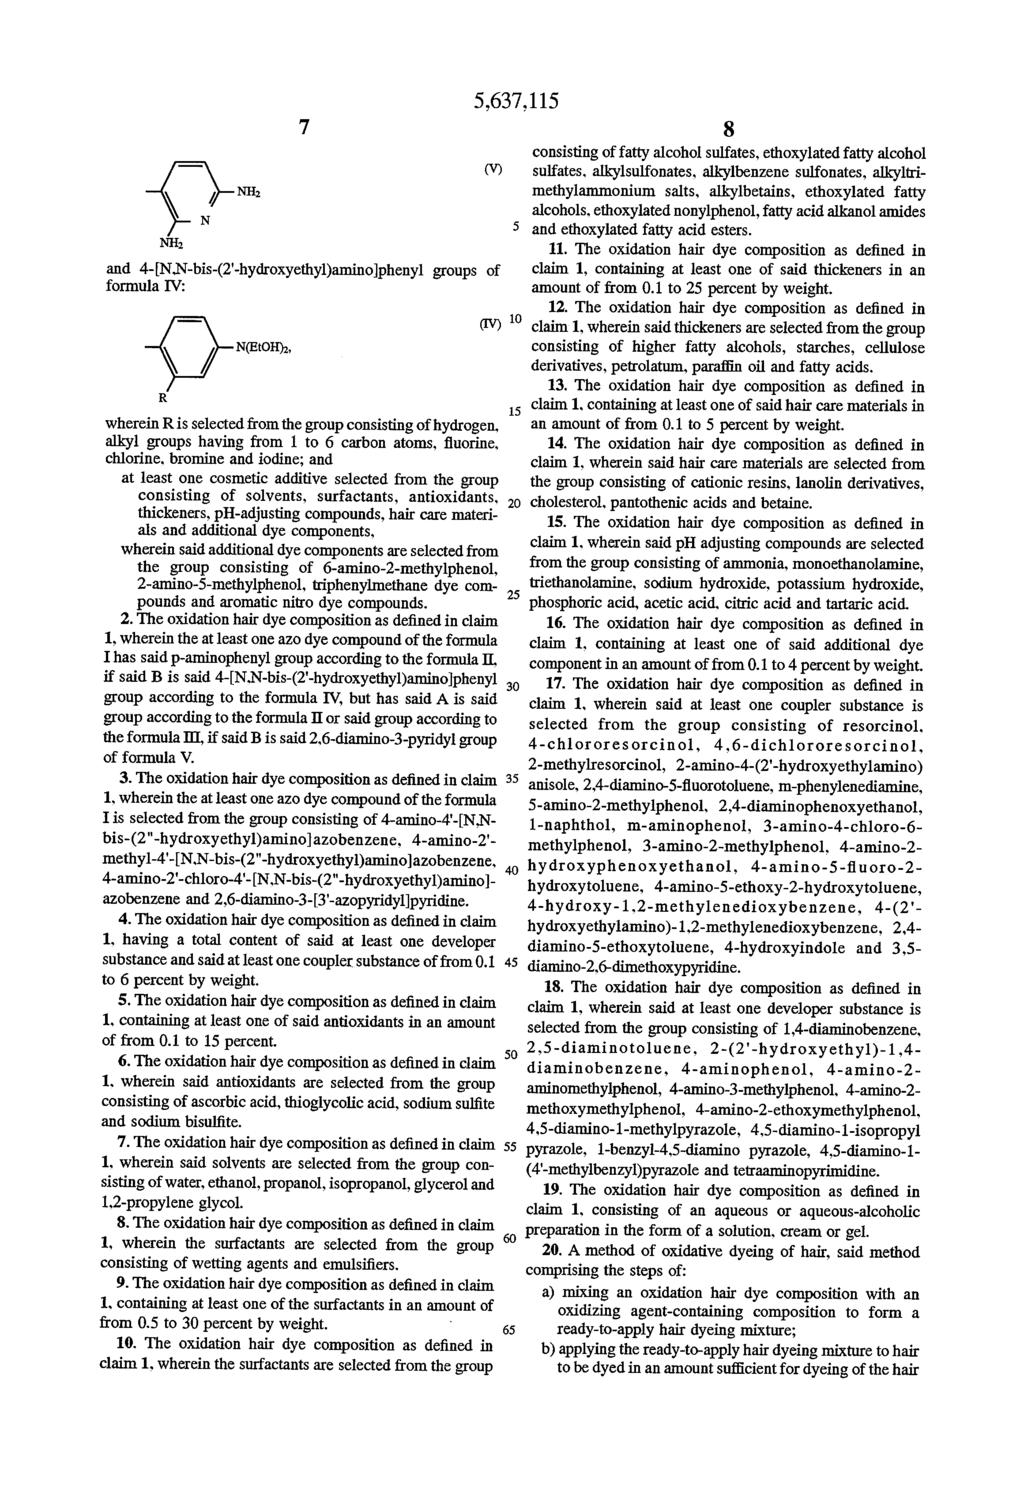 \ A H2 and 4-,-bis-(2-hydroxyethyl)aminolphenyl groups of formula IV: (EtOH), 5,637,1 (IV) wherein Ris selected from the group consisting of hydrogen, alkyl groups having from 1 to 6 carbon atoms,